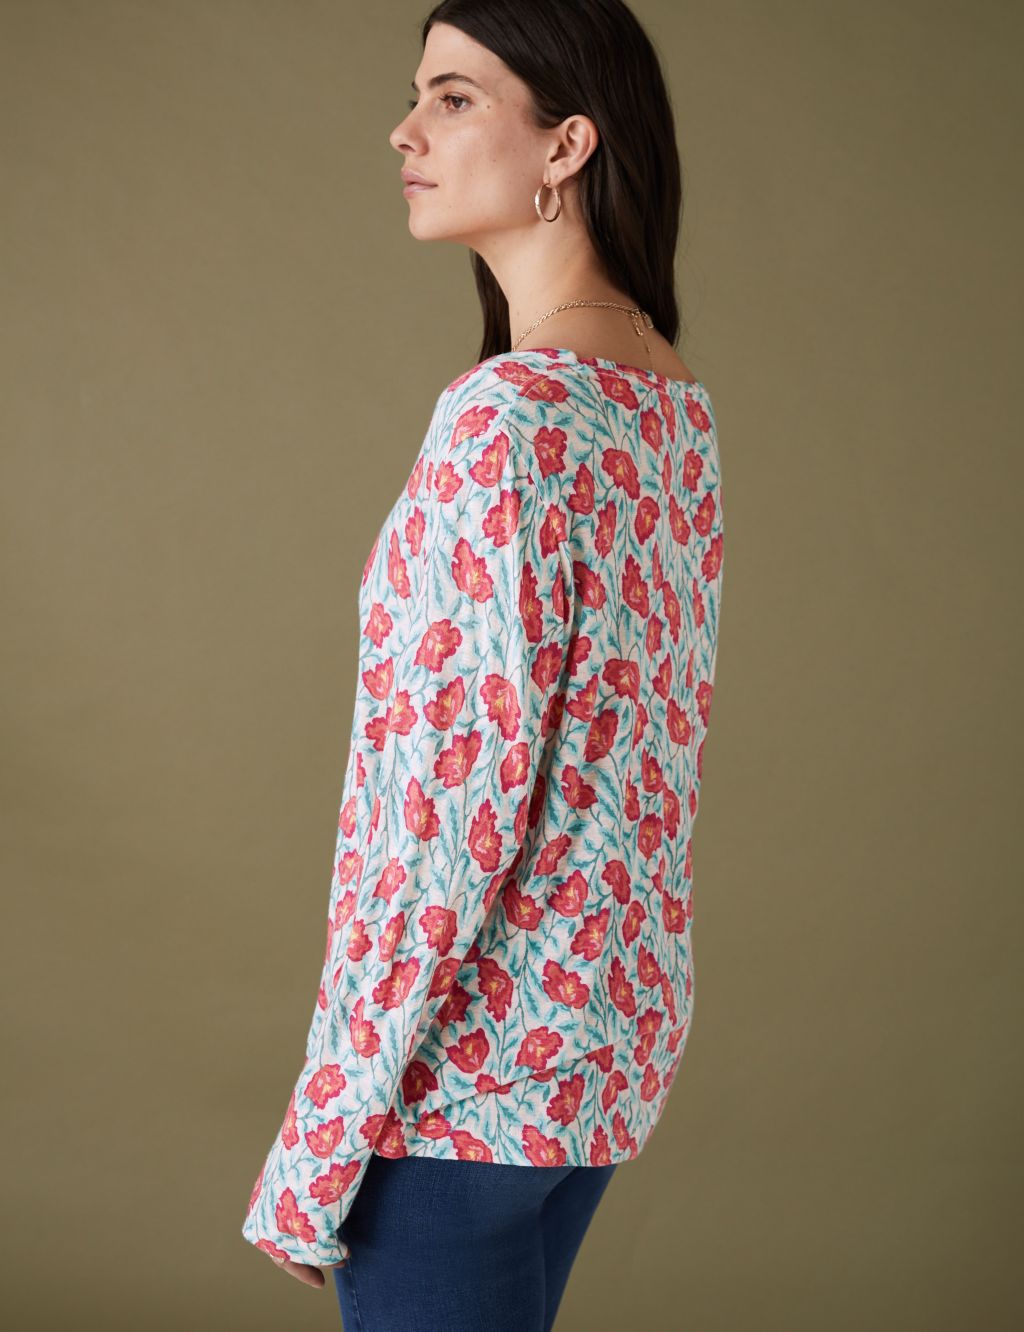 Linen Blend Printed Round Neck Top image 4